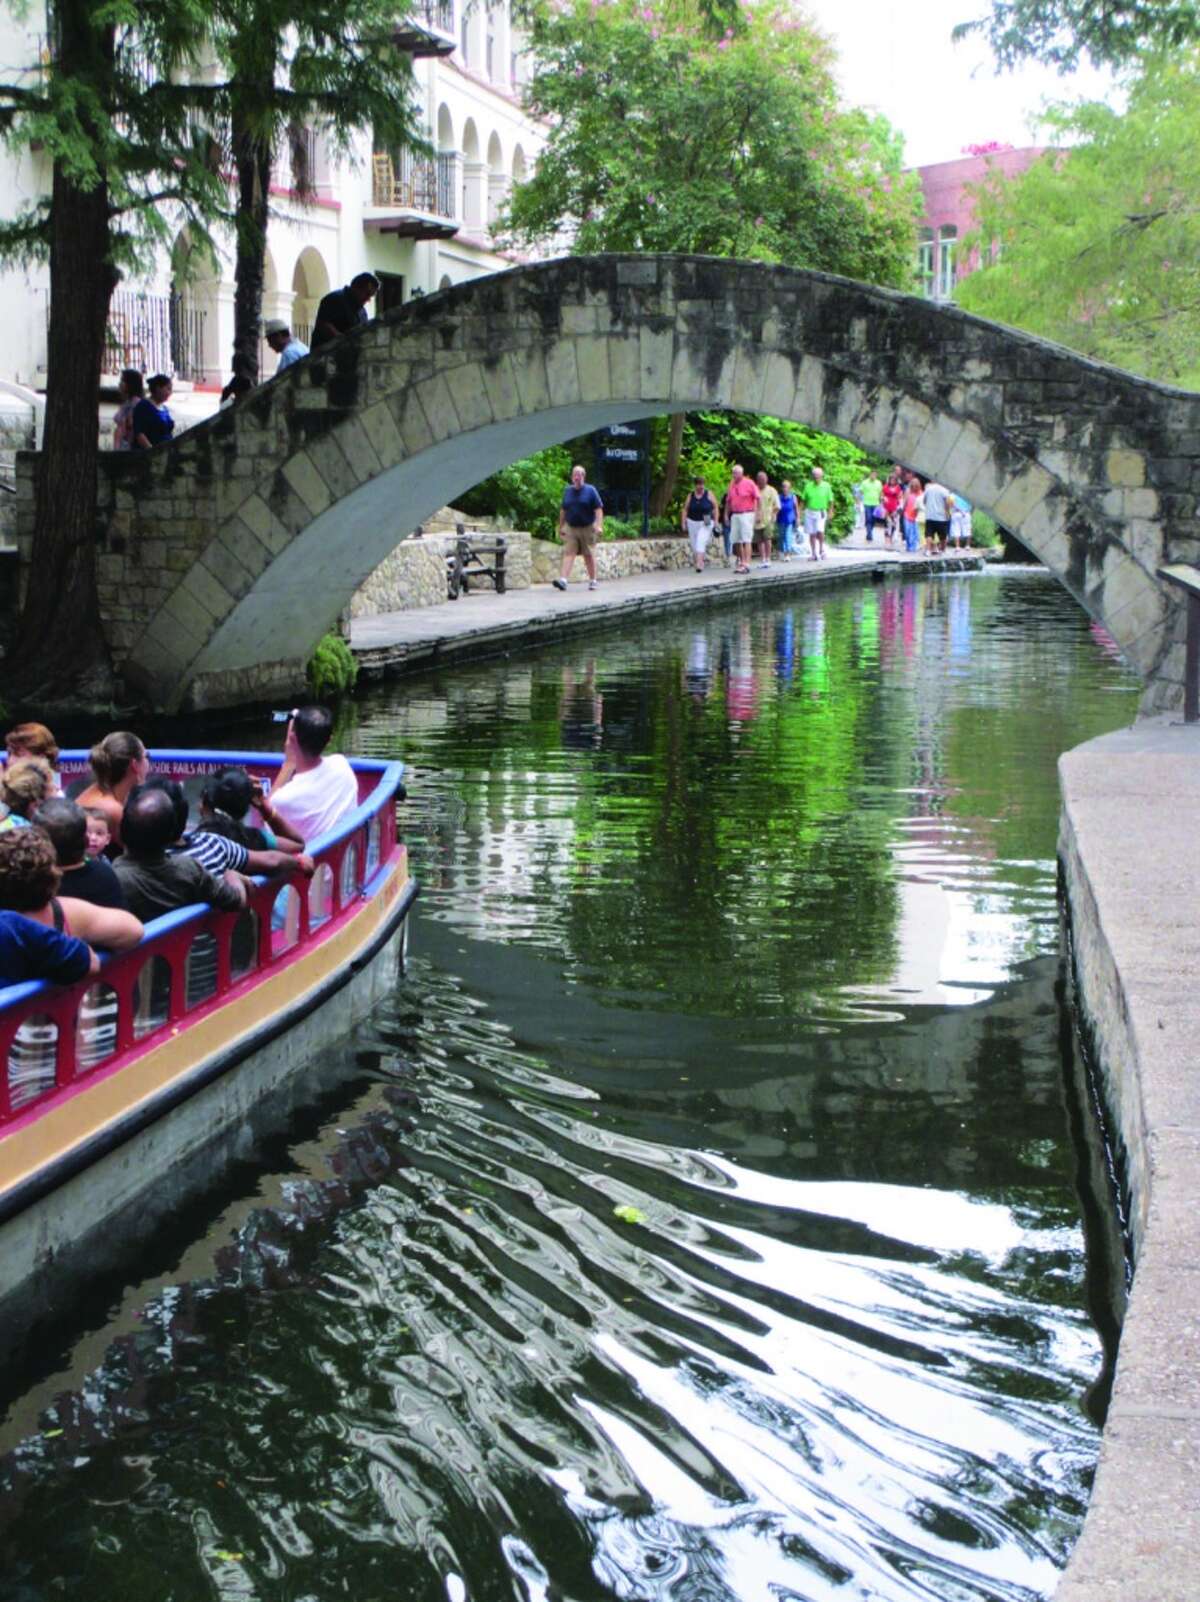 Mark Cuban called the River Walk a “muddy ugly-ass River Walk” in a discussion about the Spurs-Mavs rivalry with The Dallas Morning News.